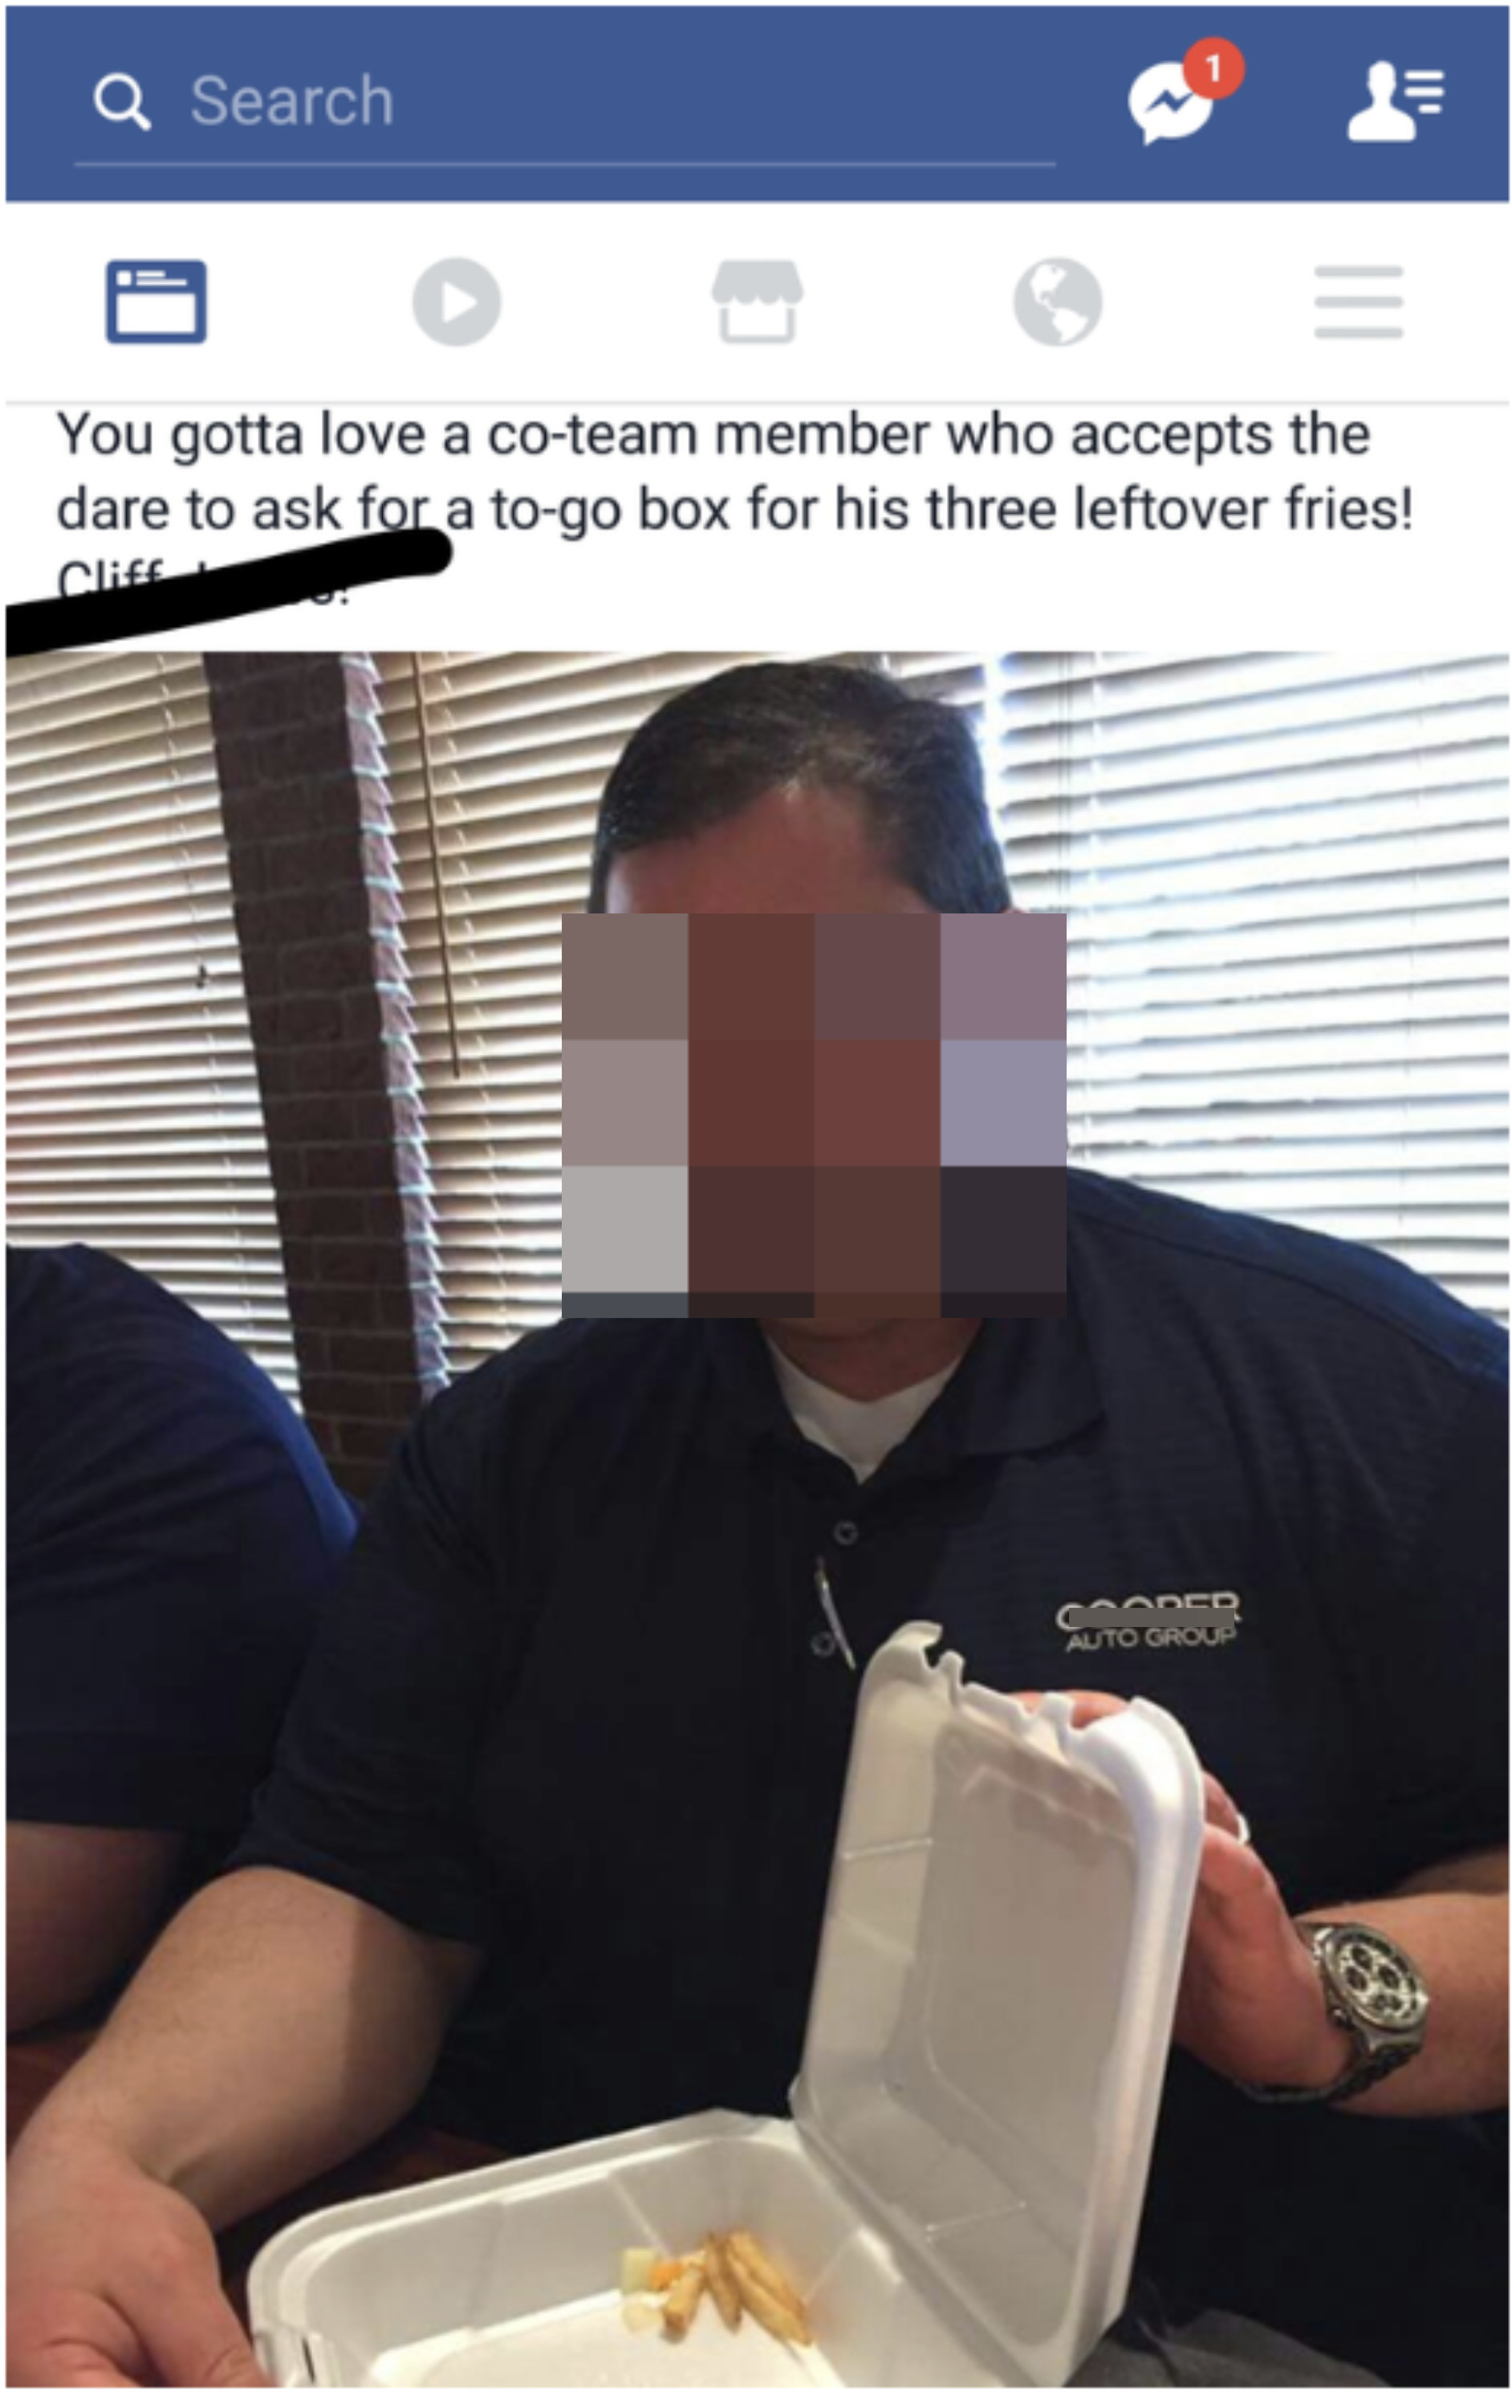 person opening up a to-go box to show three fries inside